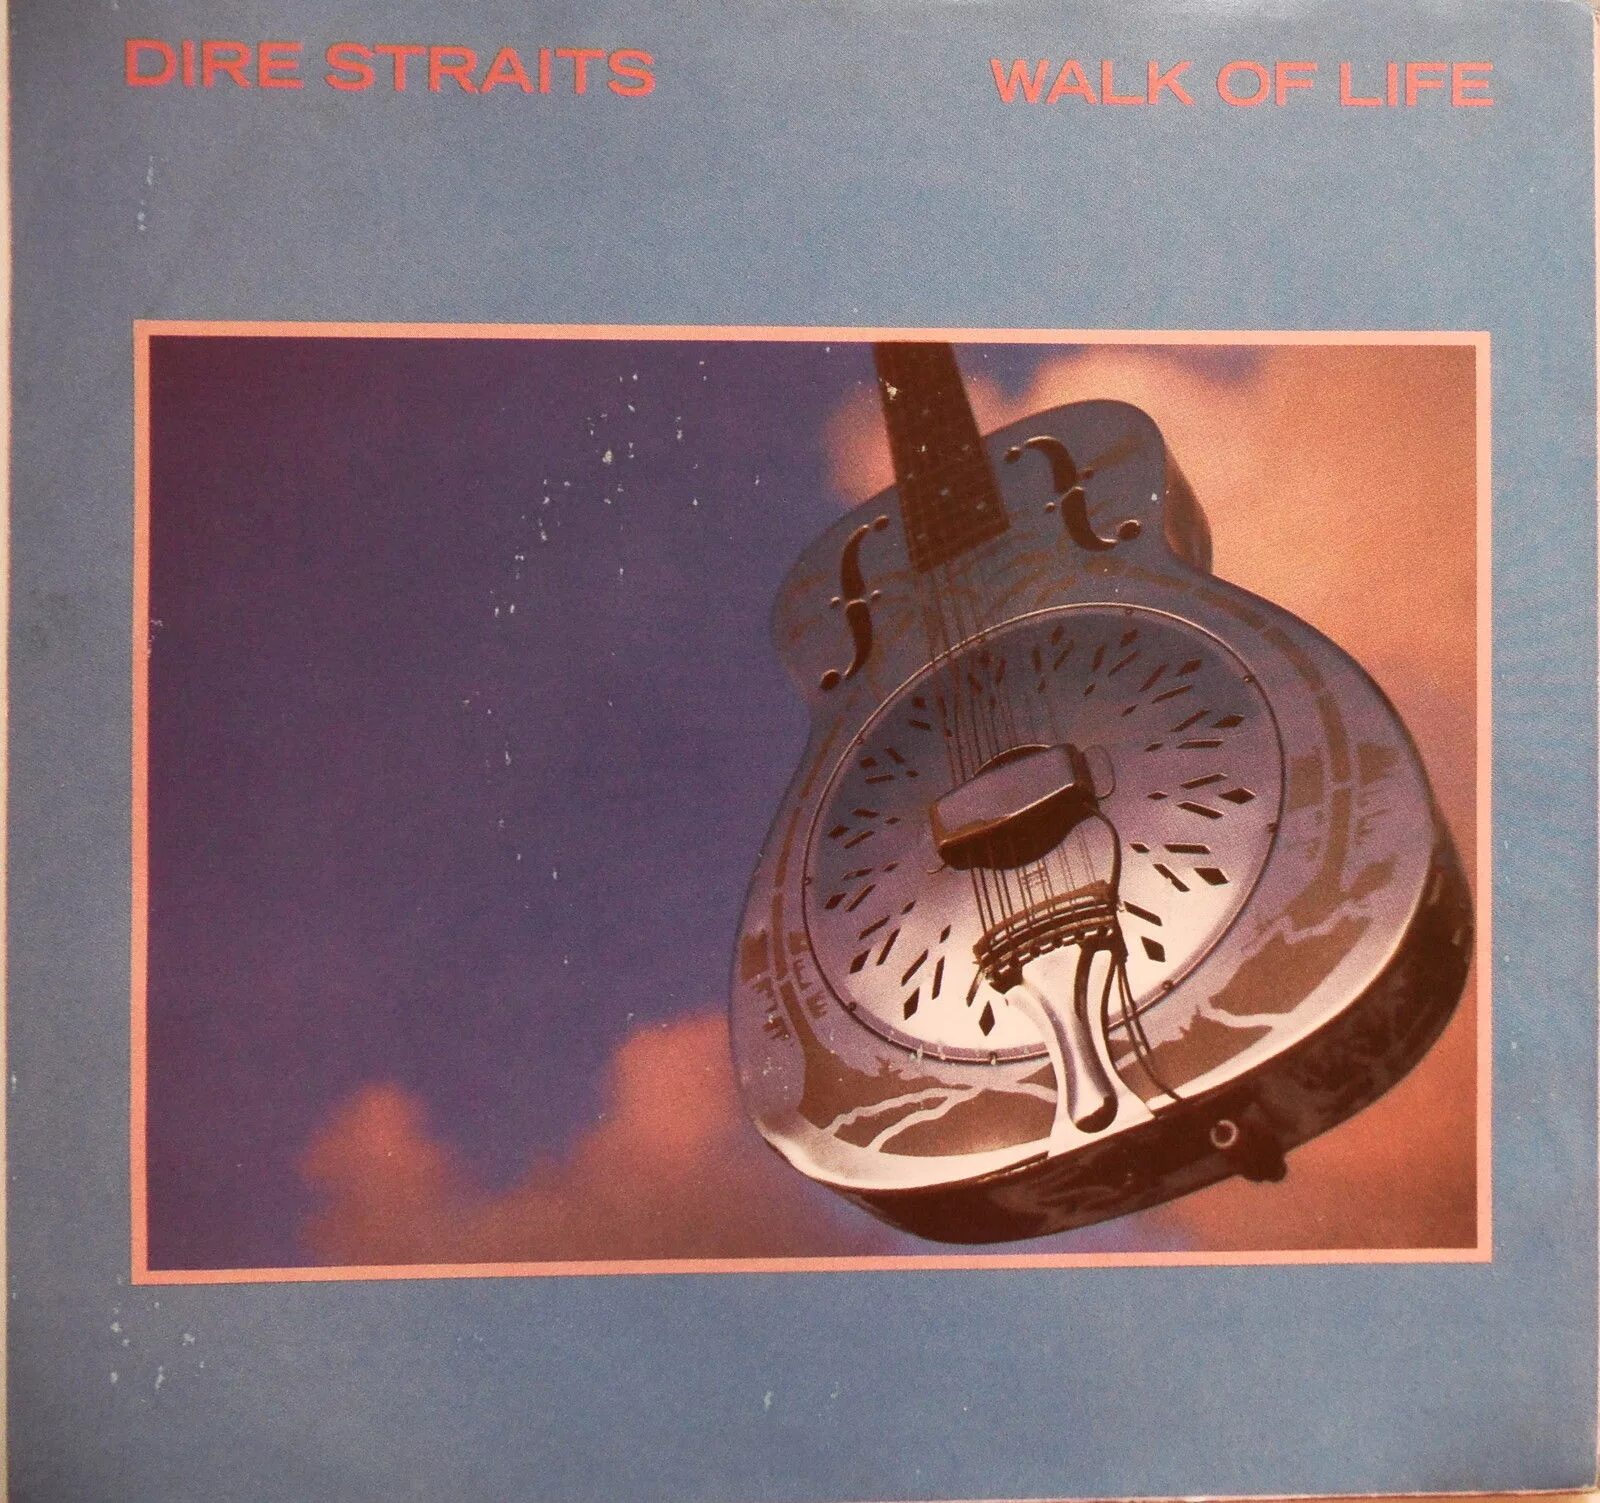 Walk of life dire. Dire Straits brothers in Arms 1985. Dire Straits brothers in Arms walk of Life. Dire Straits walk of Life. Brothers in Arms - 85.